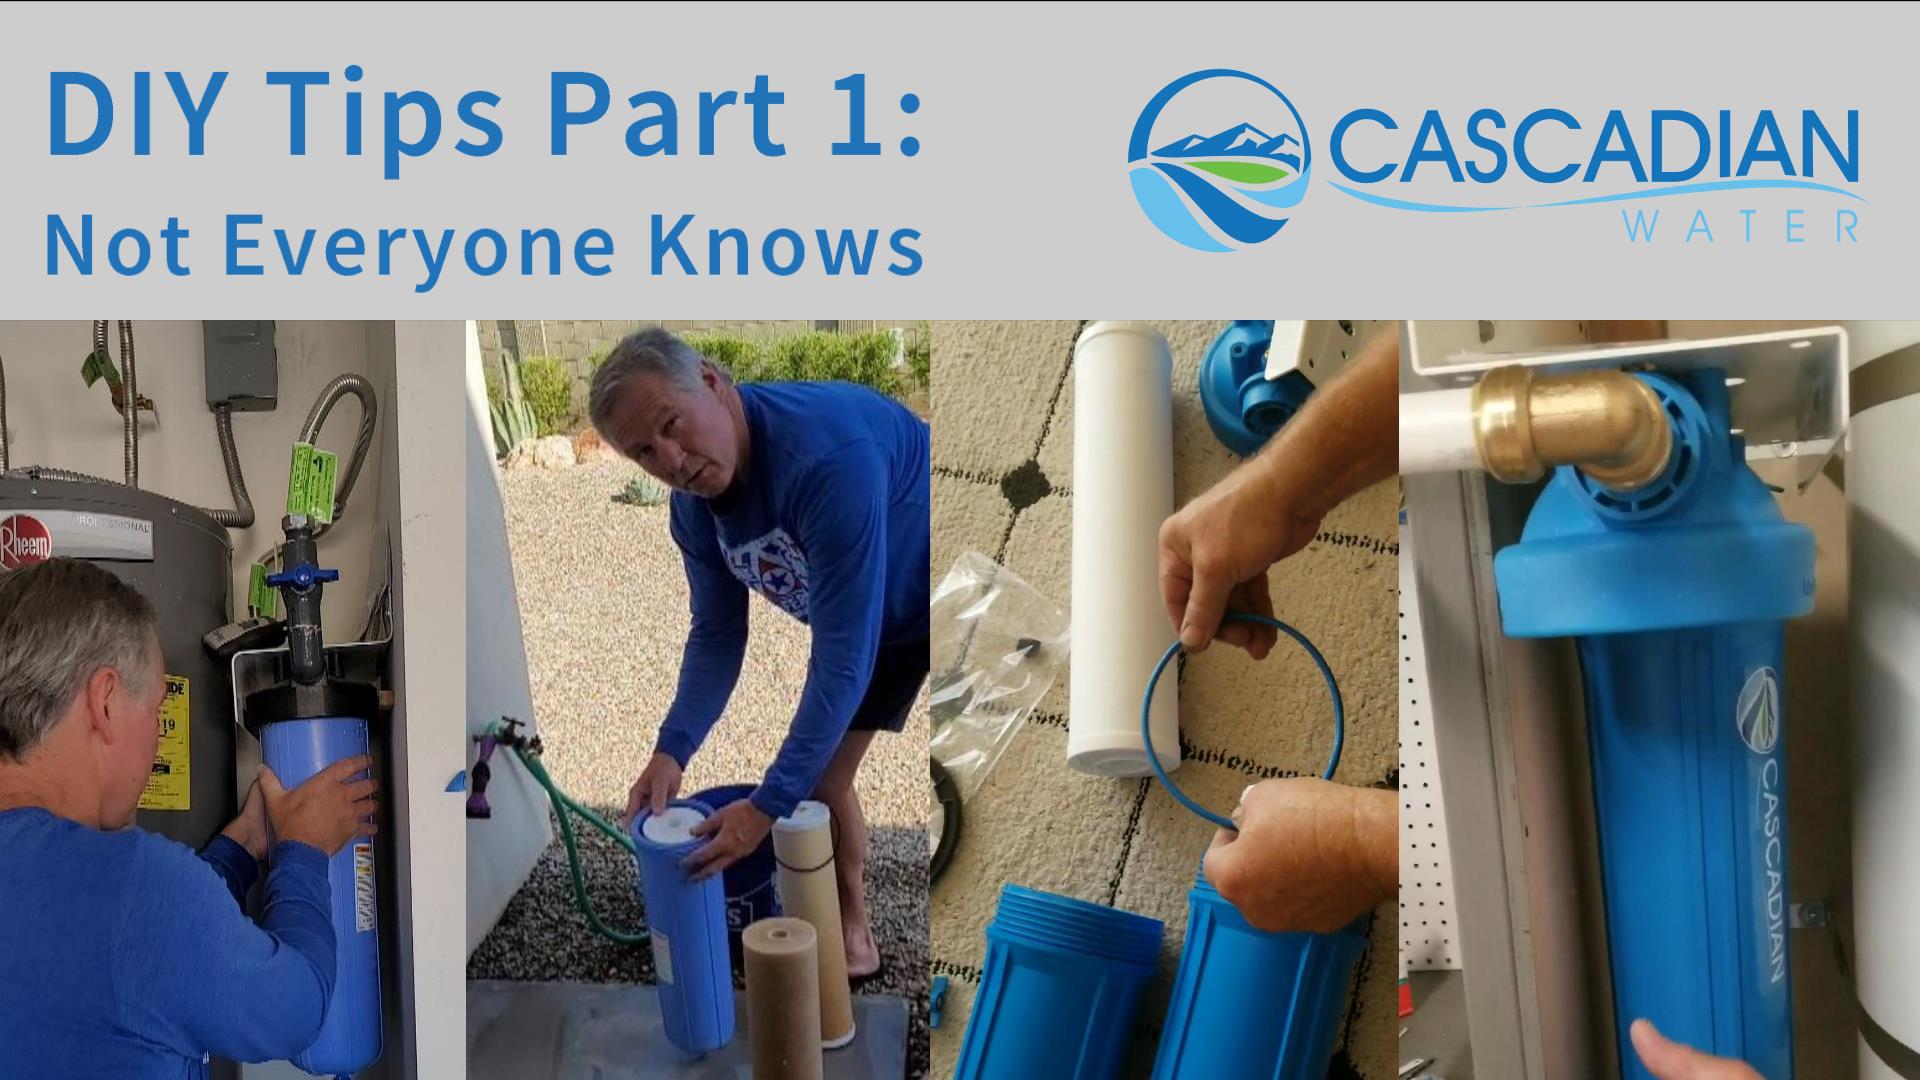 DIY Tips and Tricks Part 1 - 'Not Everyone Knows' - Cascadian Water